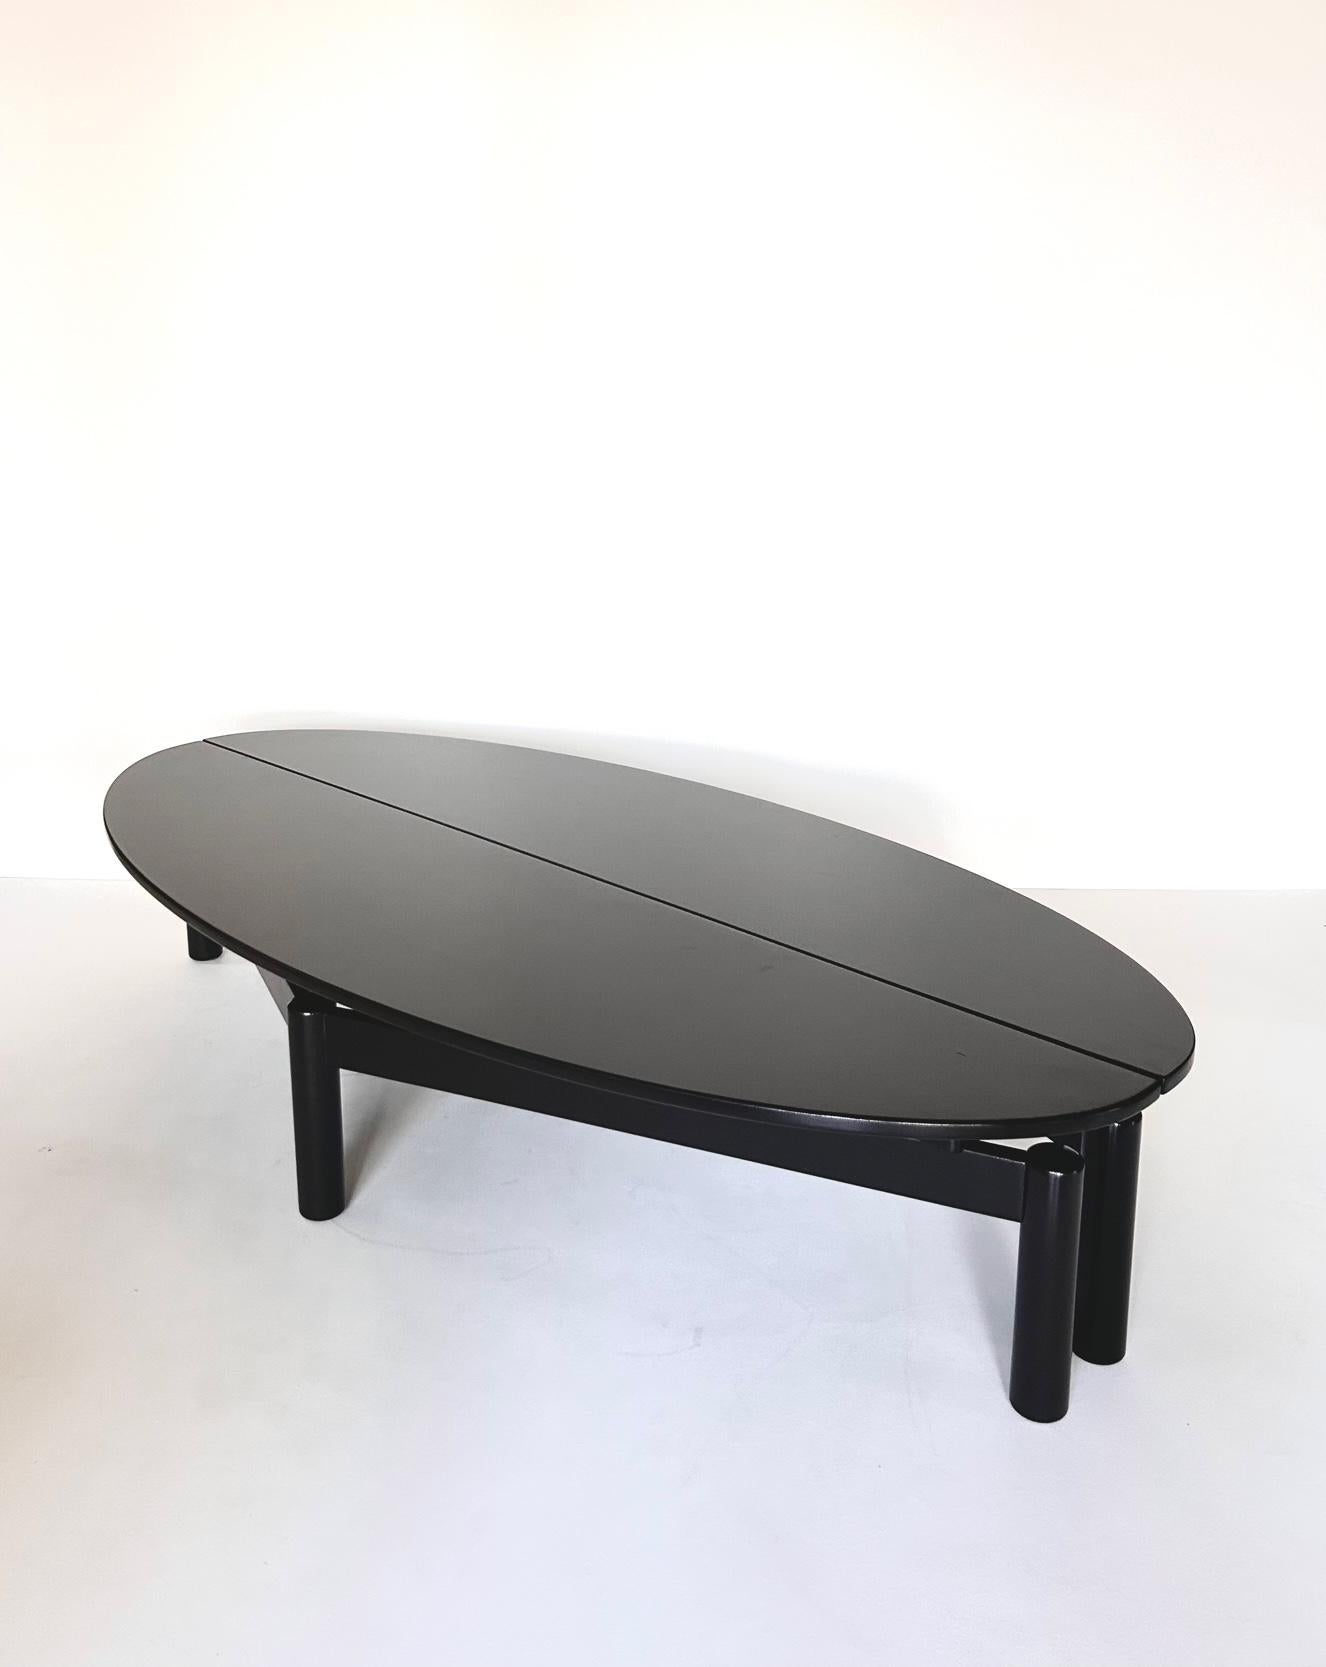 Wood Vico Magistretti Sinbad Coffee Table by Cassina, 1980's For Sale